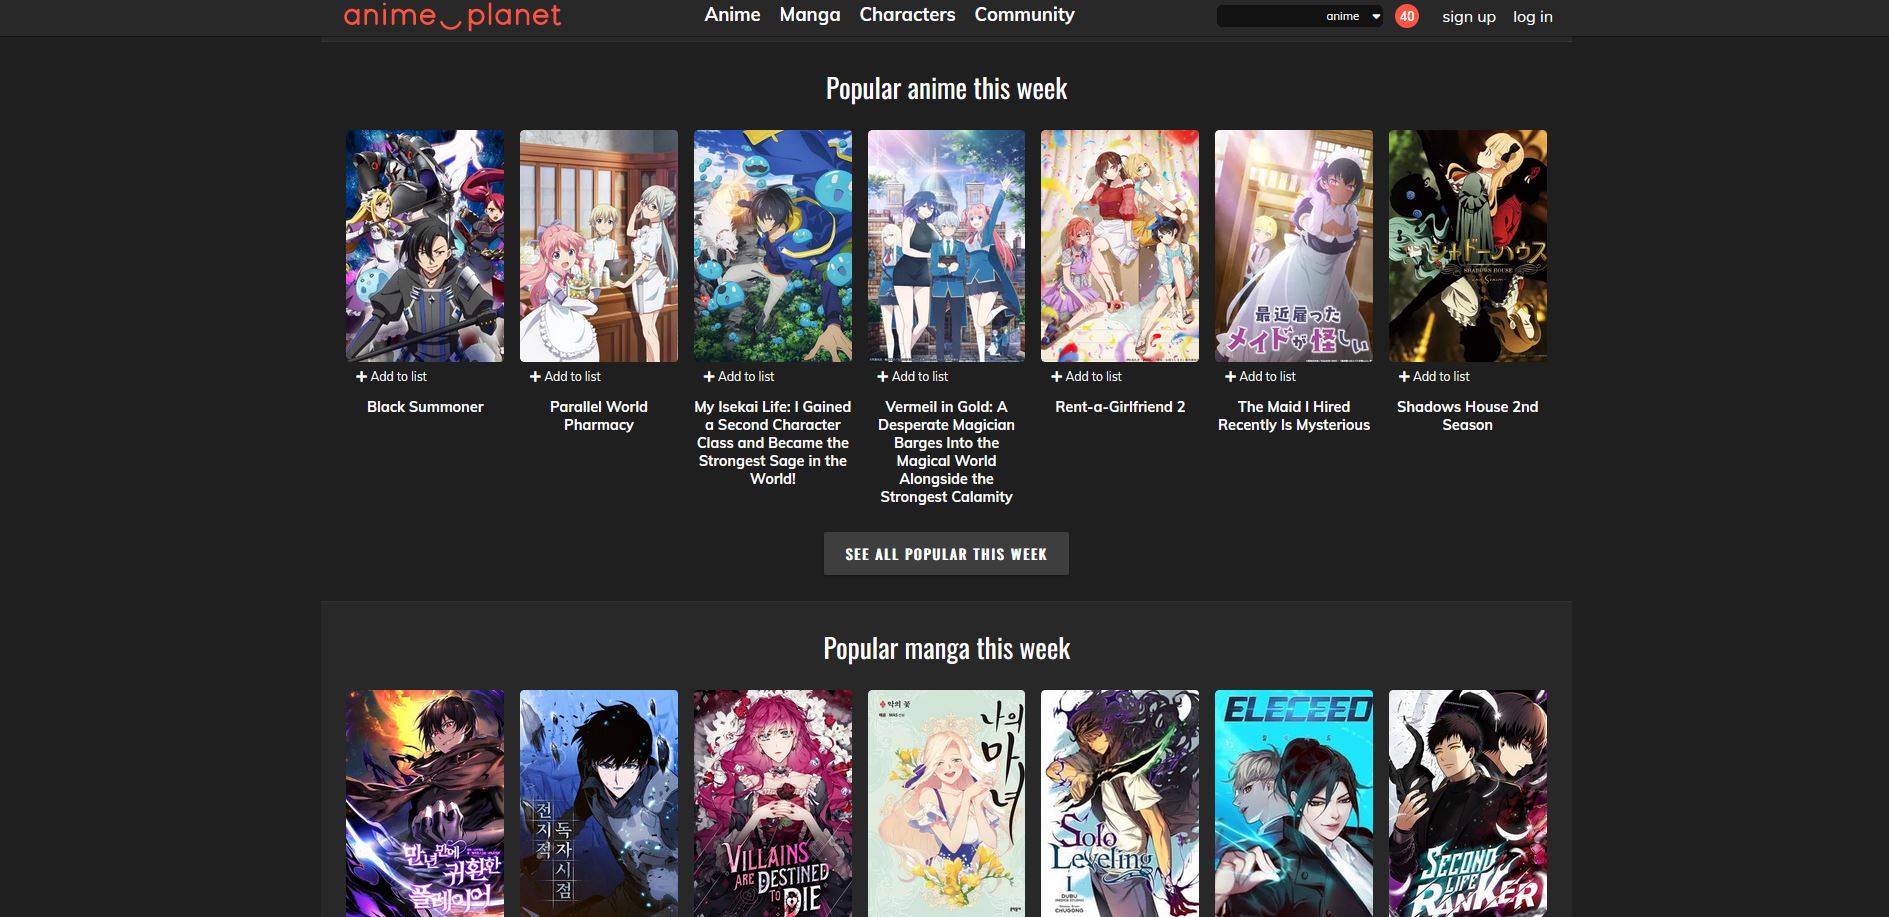 Manga is available both in paper form and online